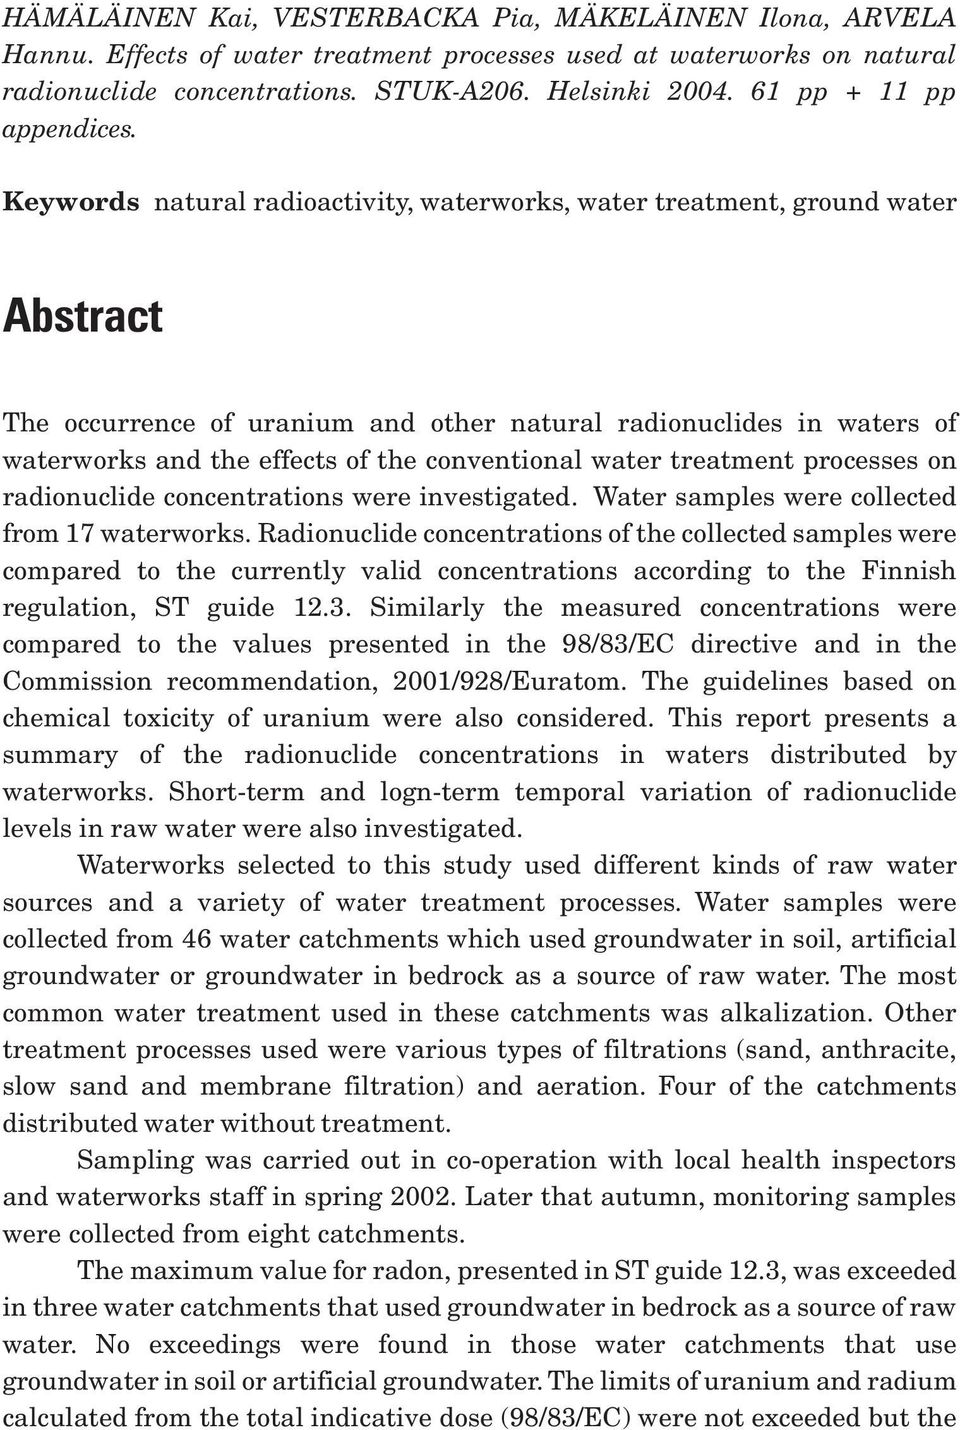 Keywords natural radioactivity, waterworks, water treatment, ground water Abstract The occurrence of uranium and other natural radionuclides in waters of waterworks and the effects of the